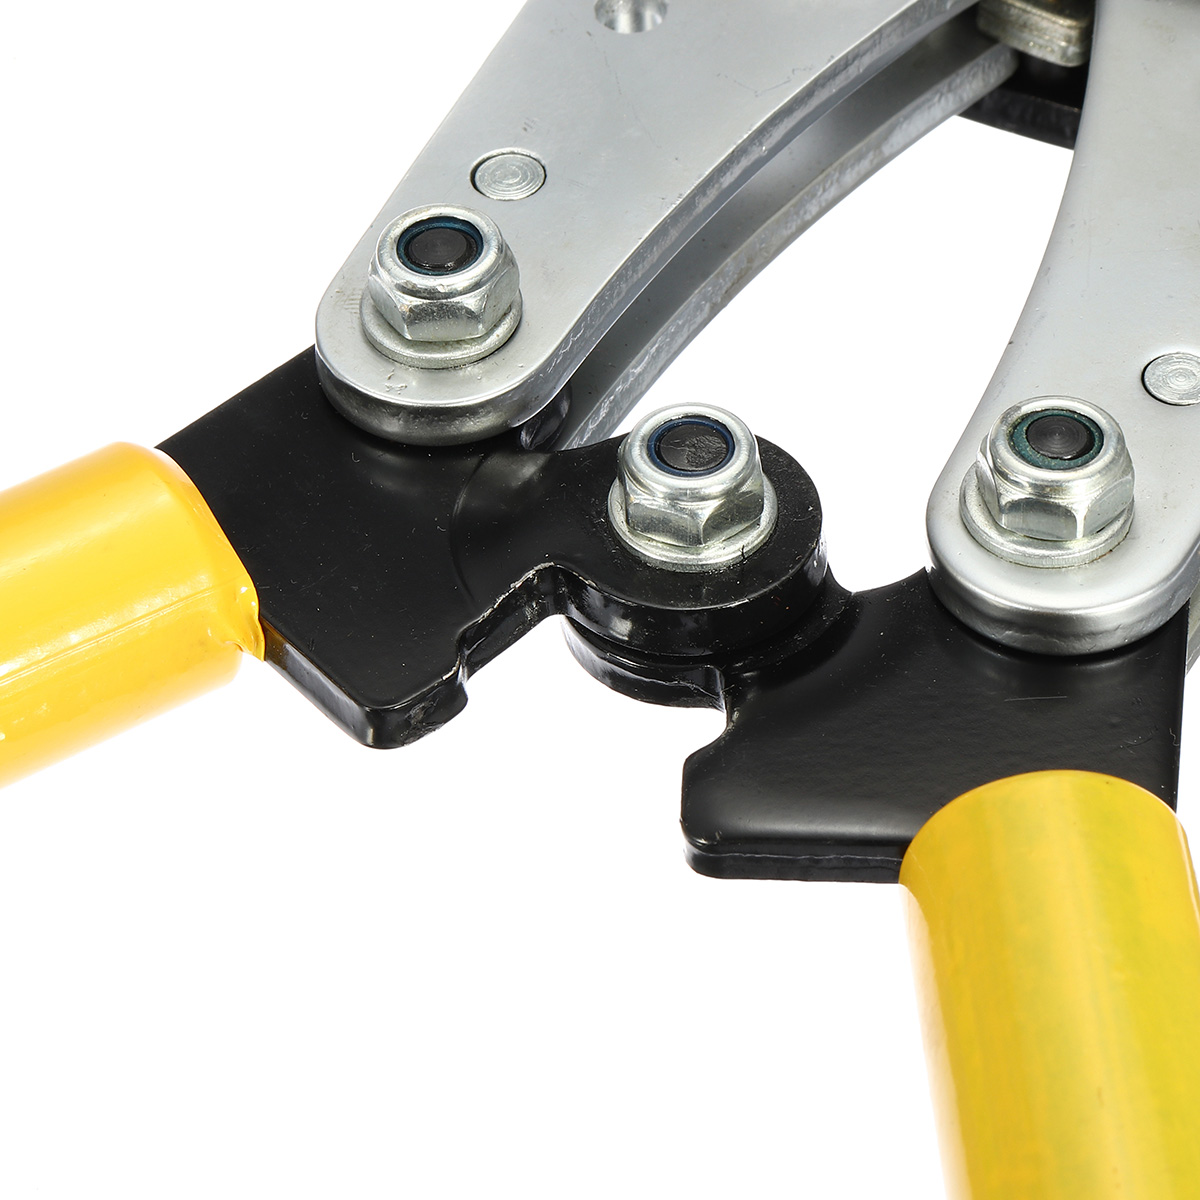 6-50-mm-Crimp-Tube-Terminal-Crimper-Plier-Tool-Battery-Cable-Lugs-Hex-Crimping-Tool-Cable-Terminal-P-1549269-6